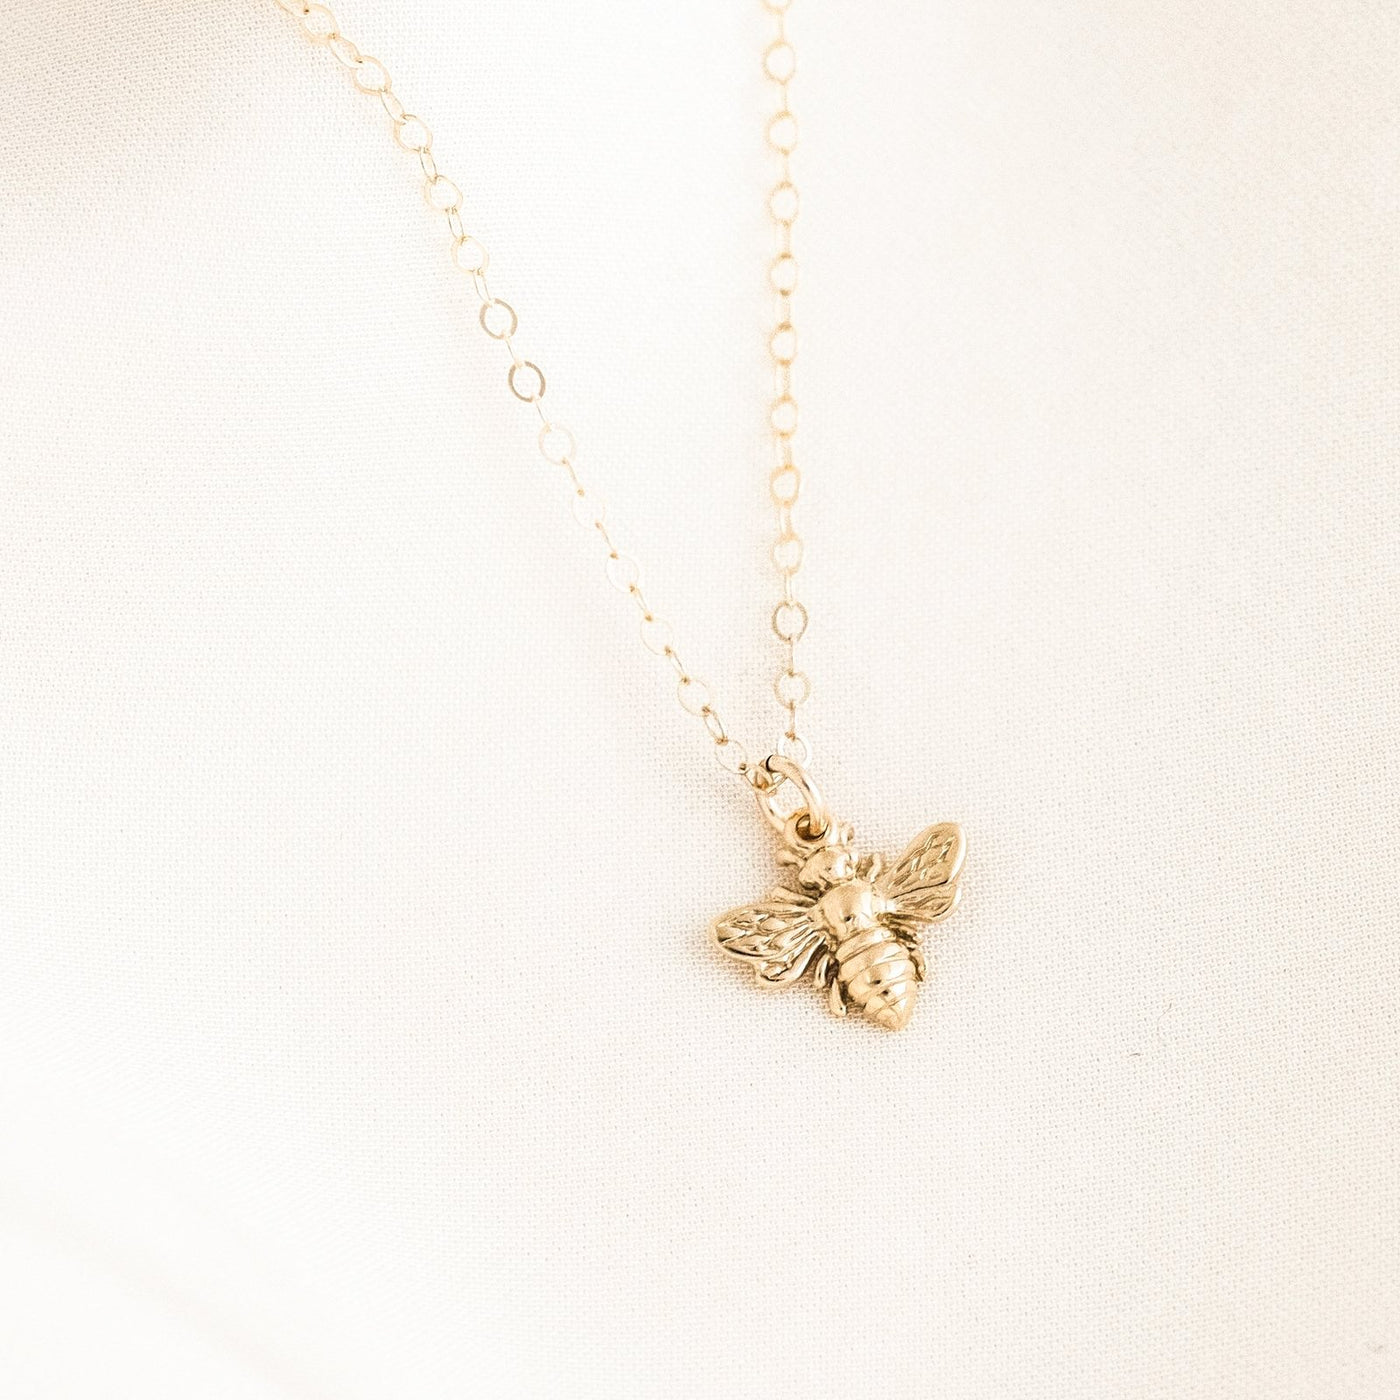 Honey Bee Necklace by Simple & Dainty Jewelry